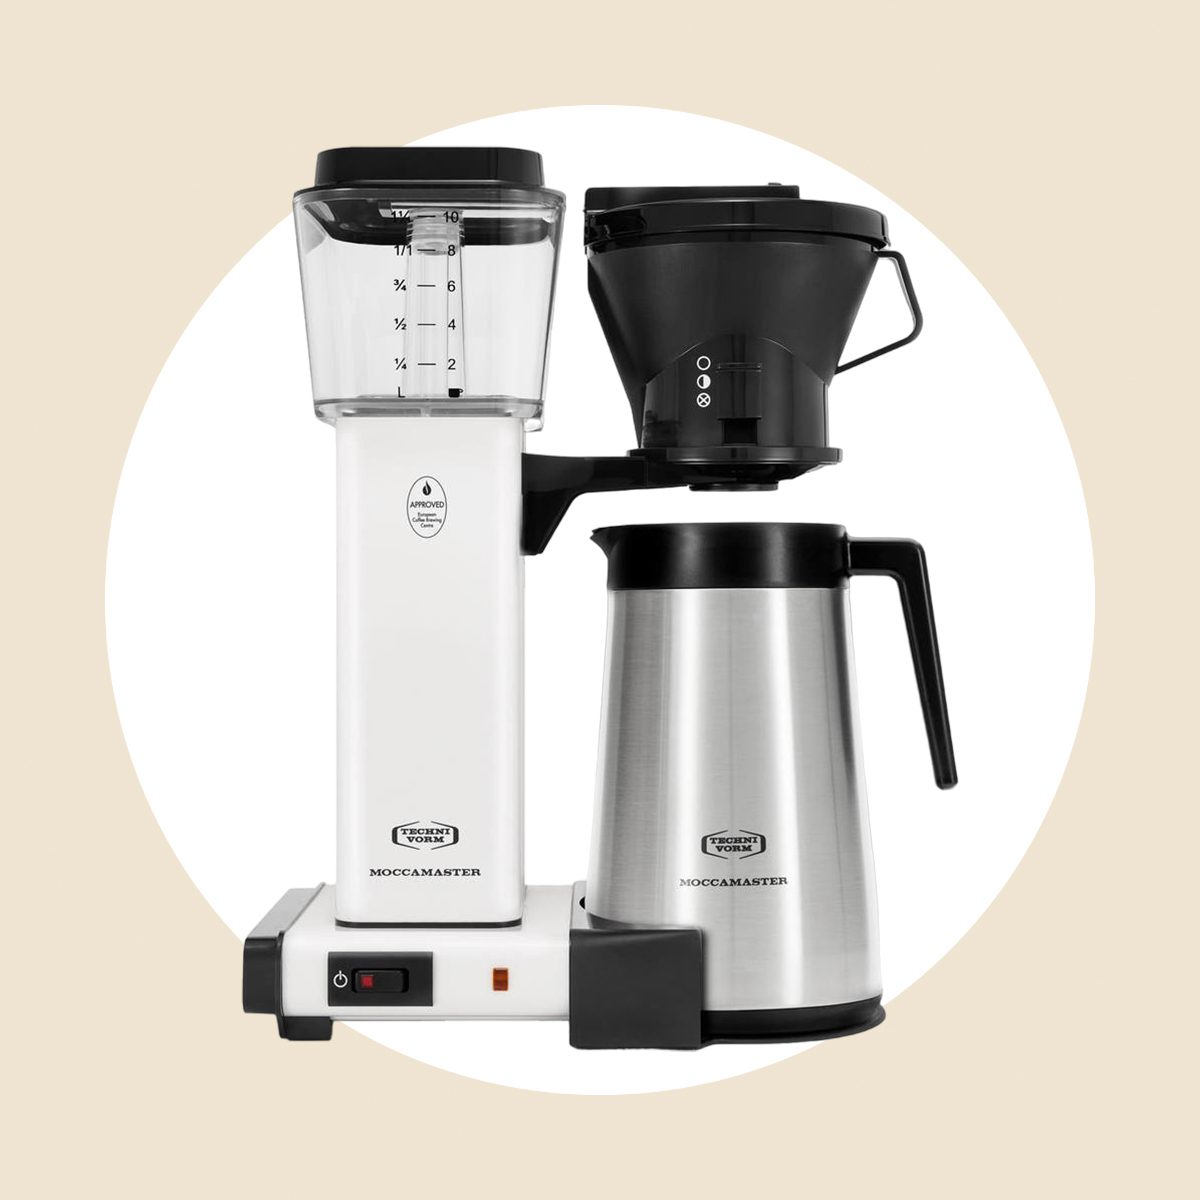 Moccamaster Thermal Carafe Coffee Brewer Ecomm Via Nordstrom.com